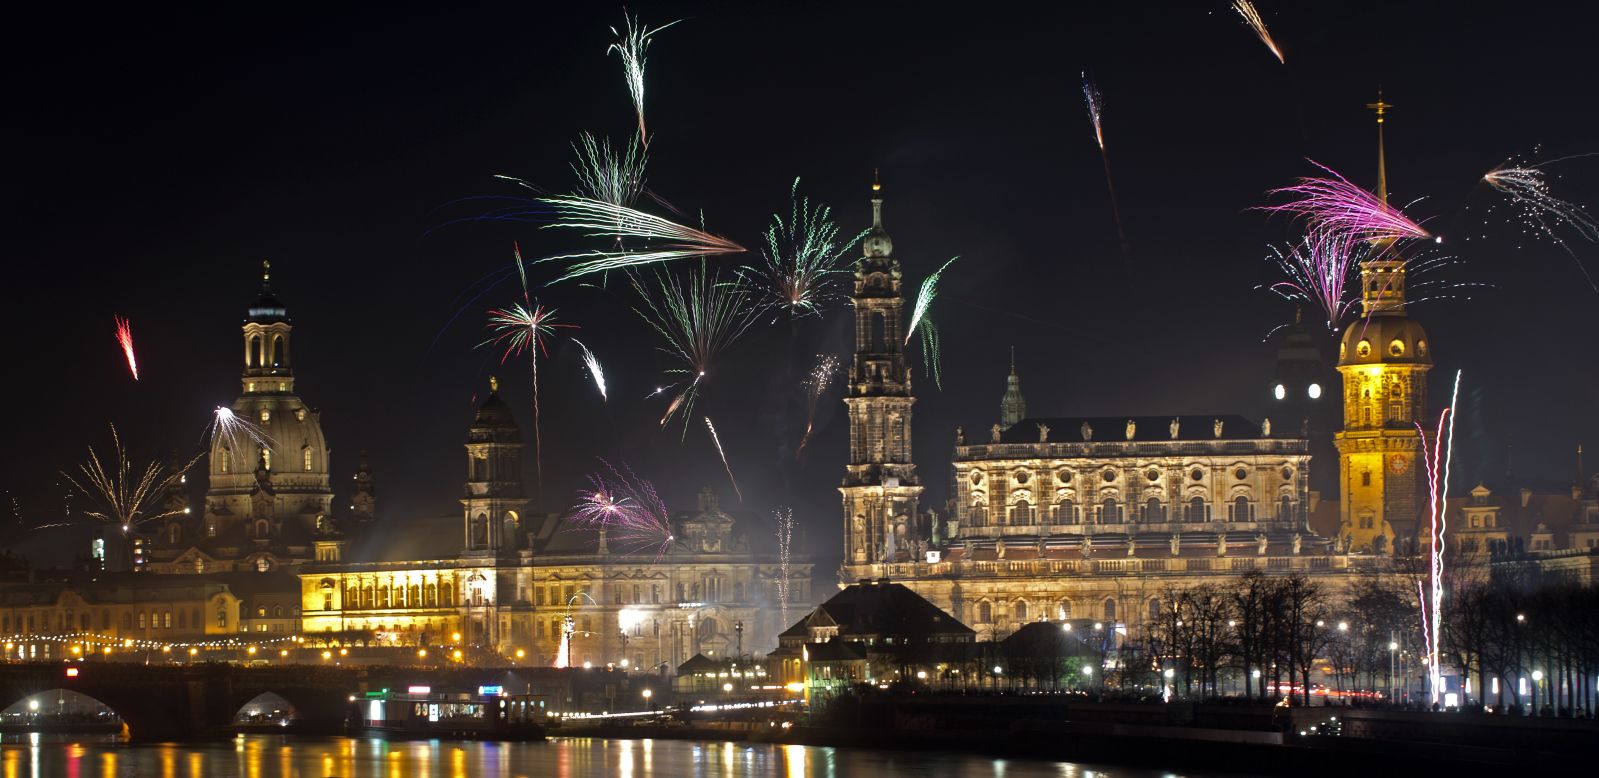 Fireworks erupt over on the Elbe River during New Year's Eve celebrations in Dresden.